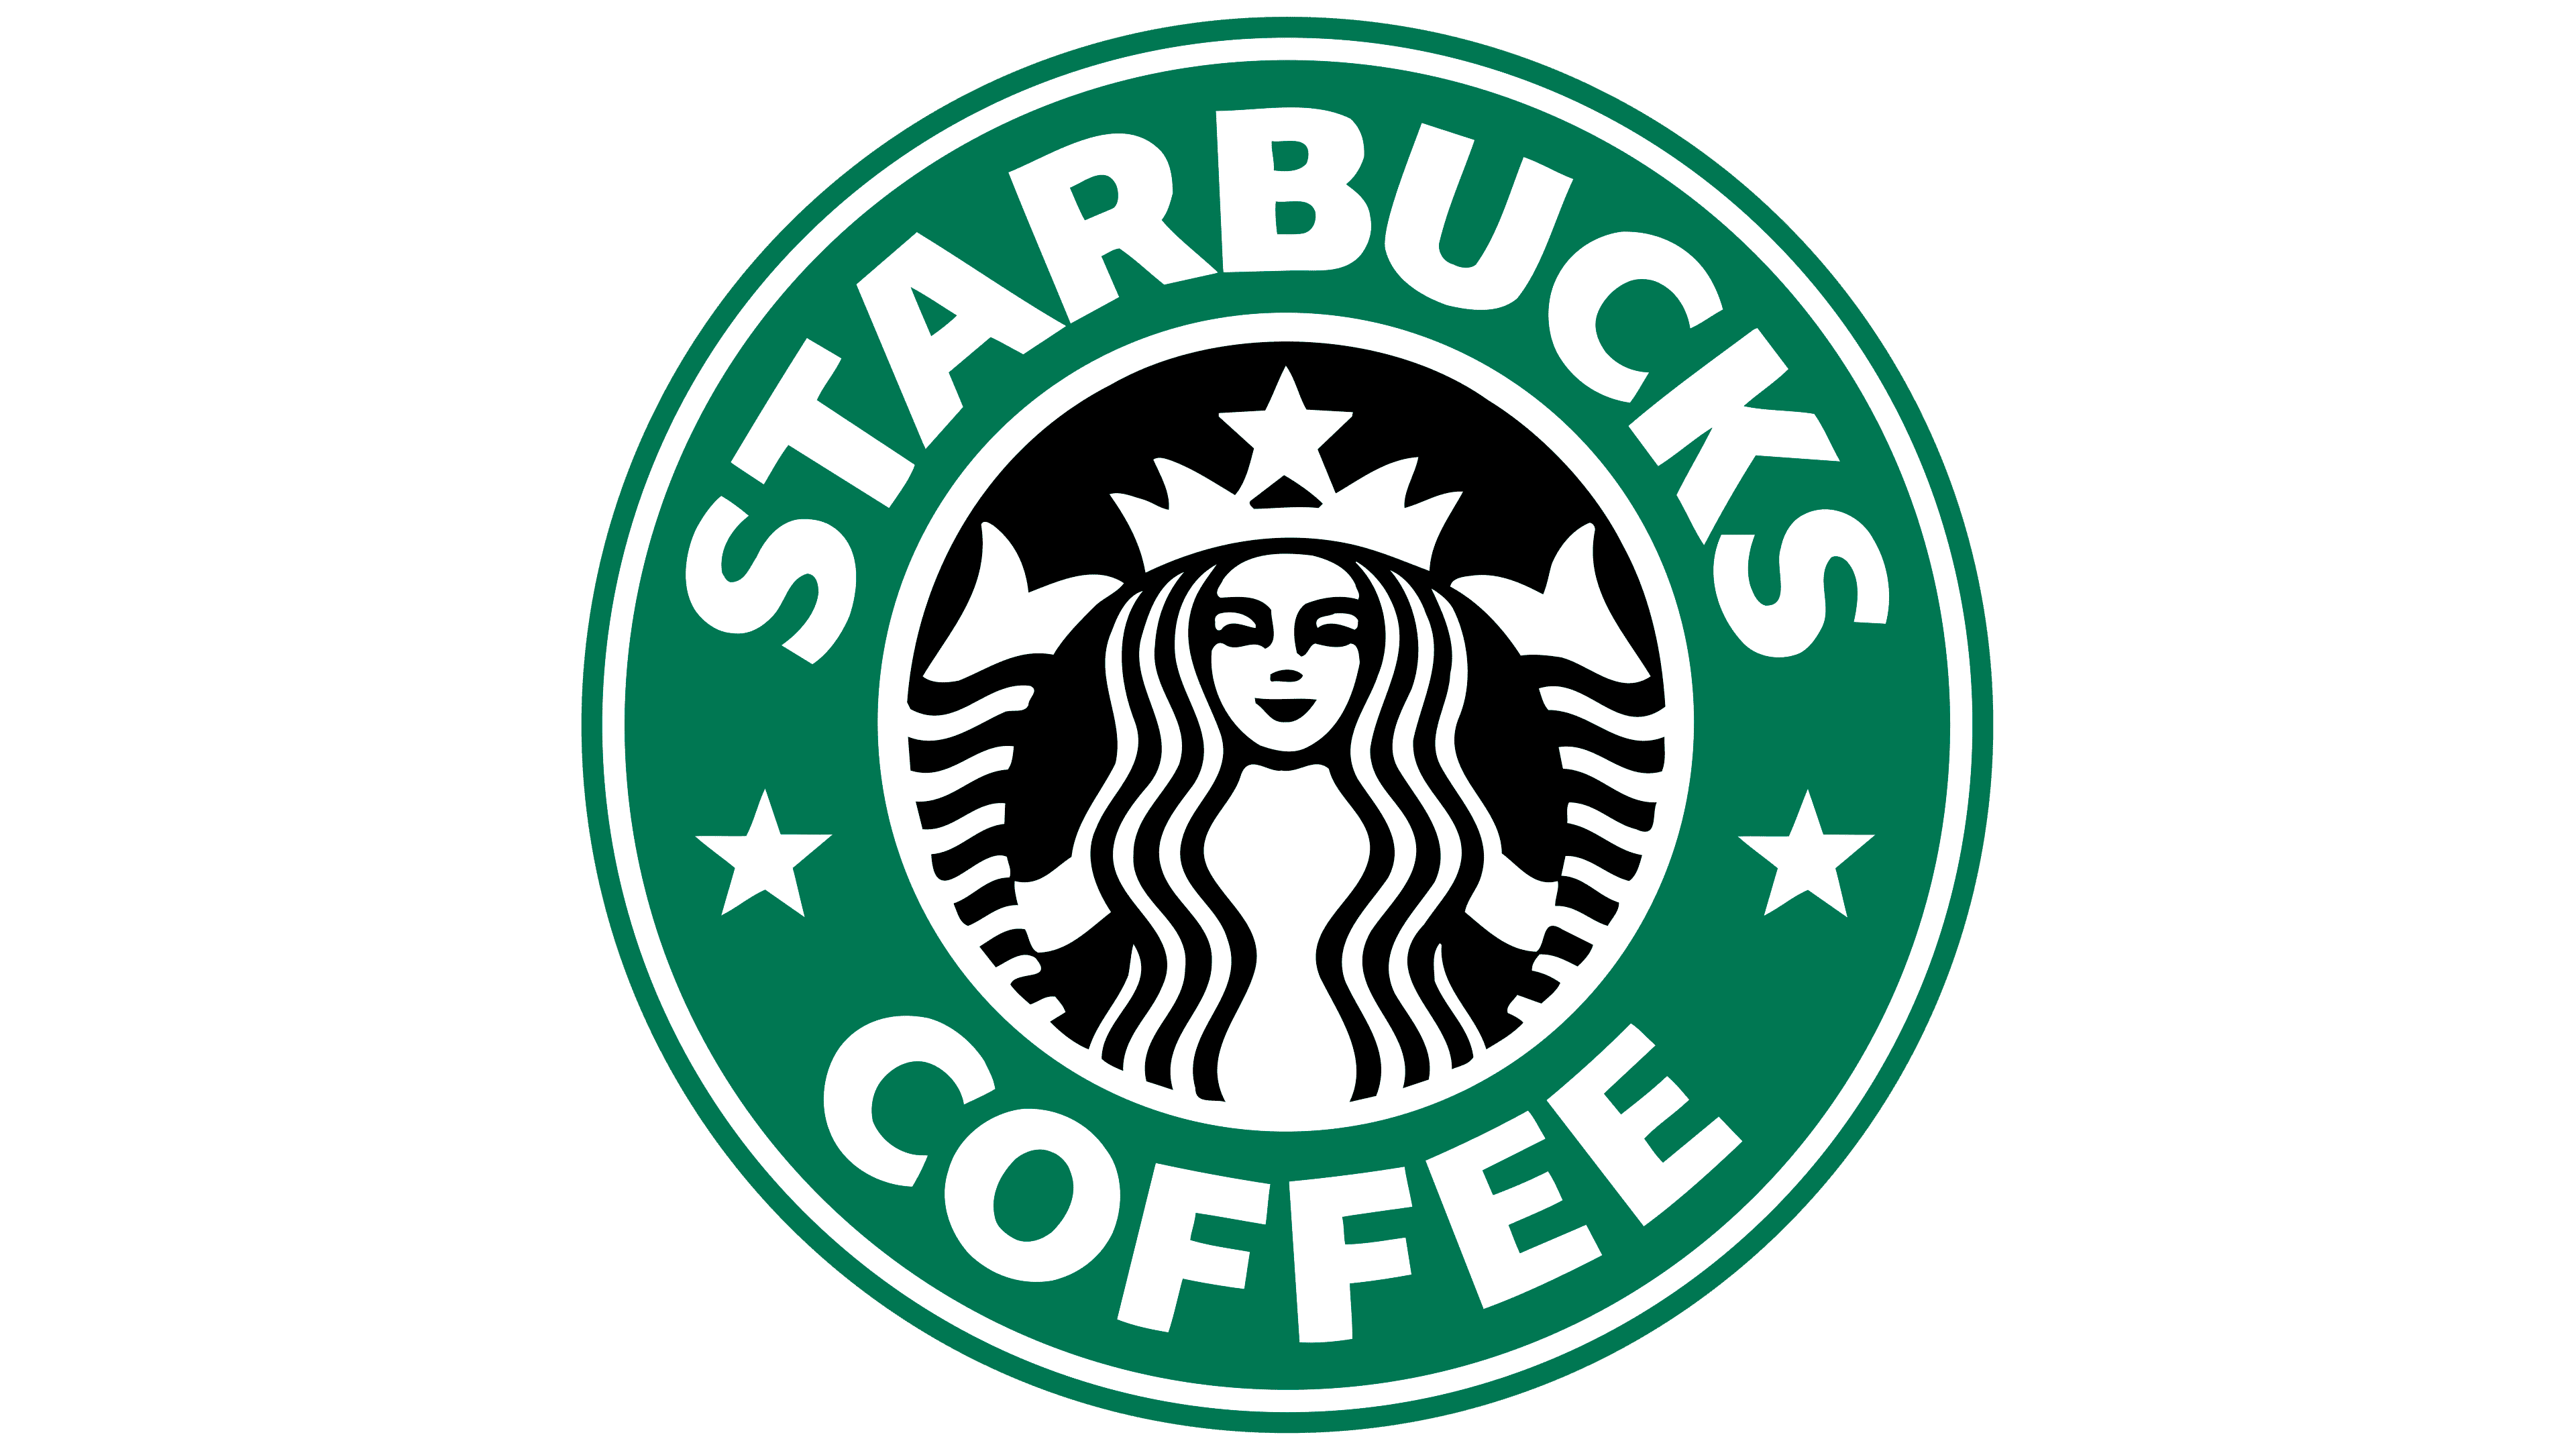 Starbucks logo for the blog article "What Are the Types of Logo Design?"